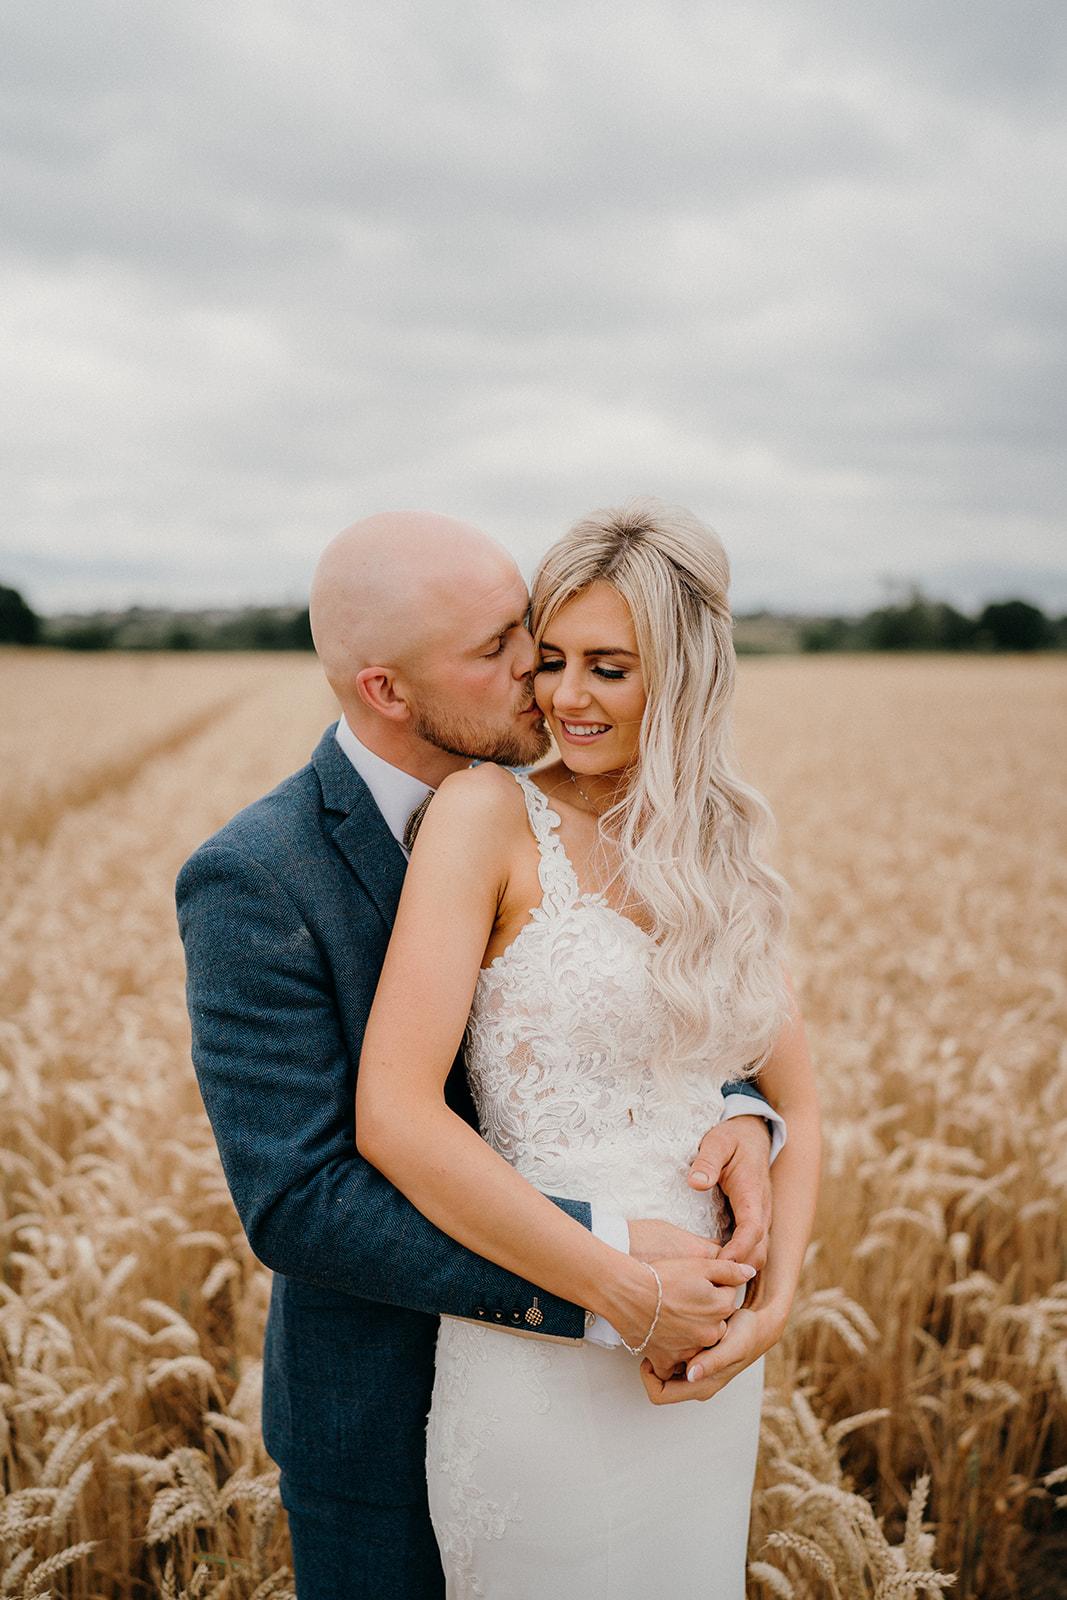 Bride and groom in the barley fields in a romantic, natural portrait.